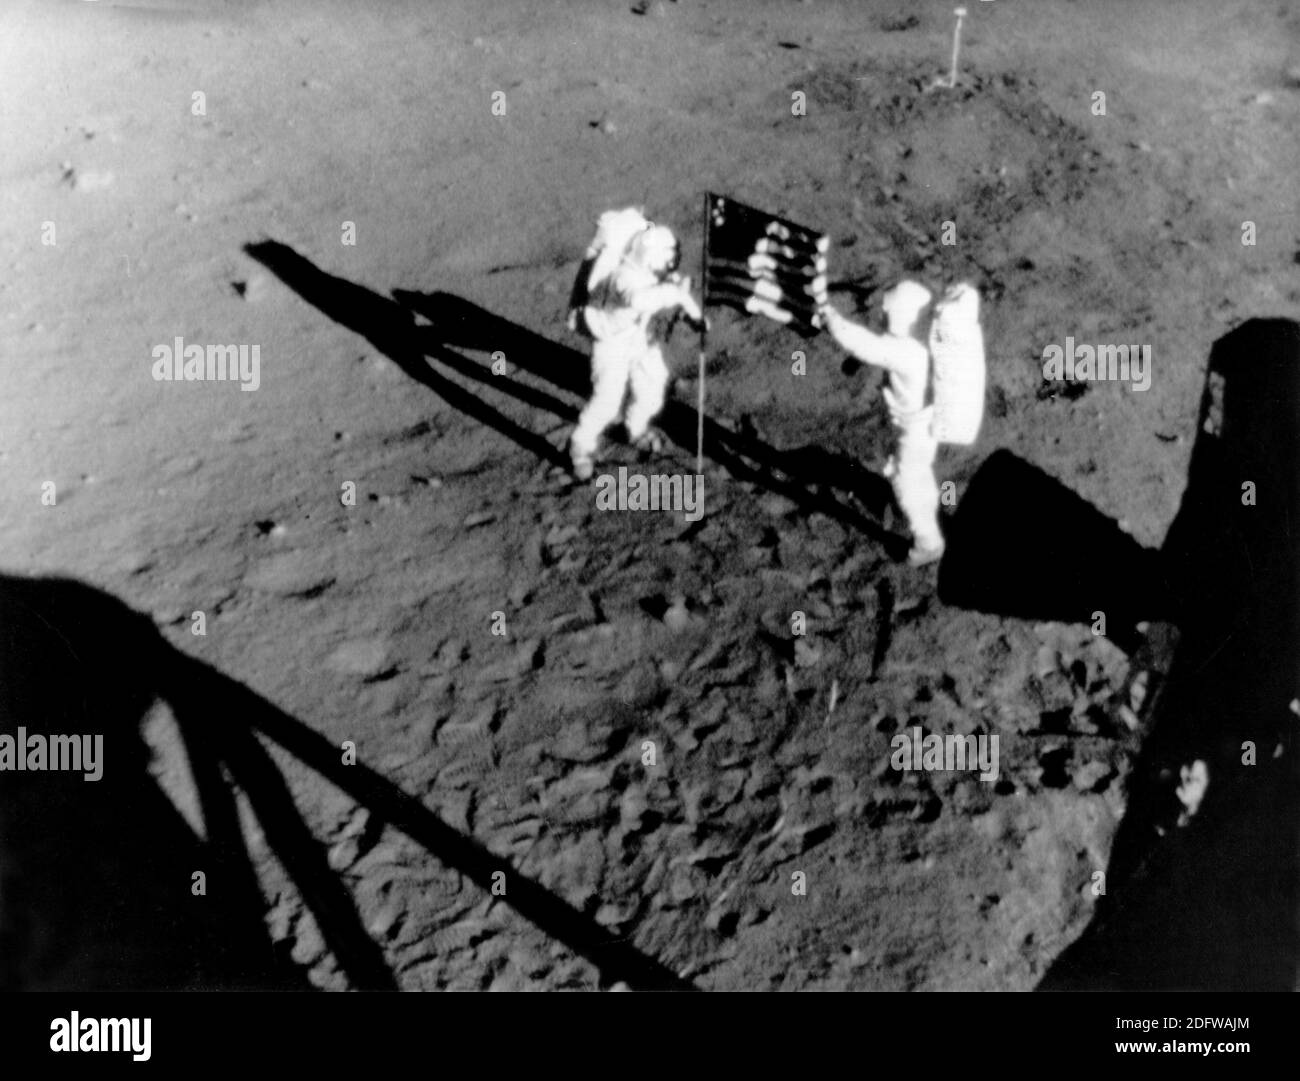 American astronaut Edwin Aldrin and Neil Armstrong set the American flag on the moon. On 20.7.1969 they were the first humans to enter the moon. Photo by CNP/ABACAPRESS.COM Stock Photo